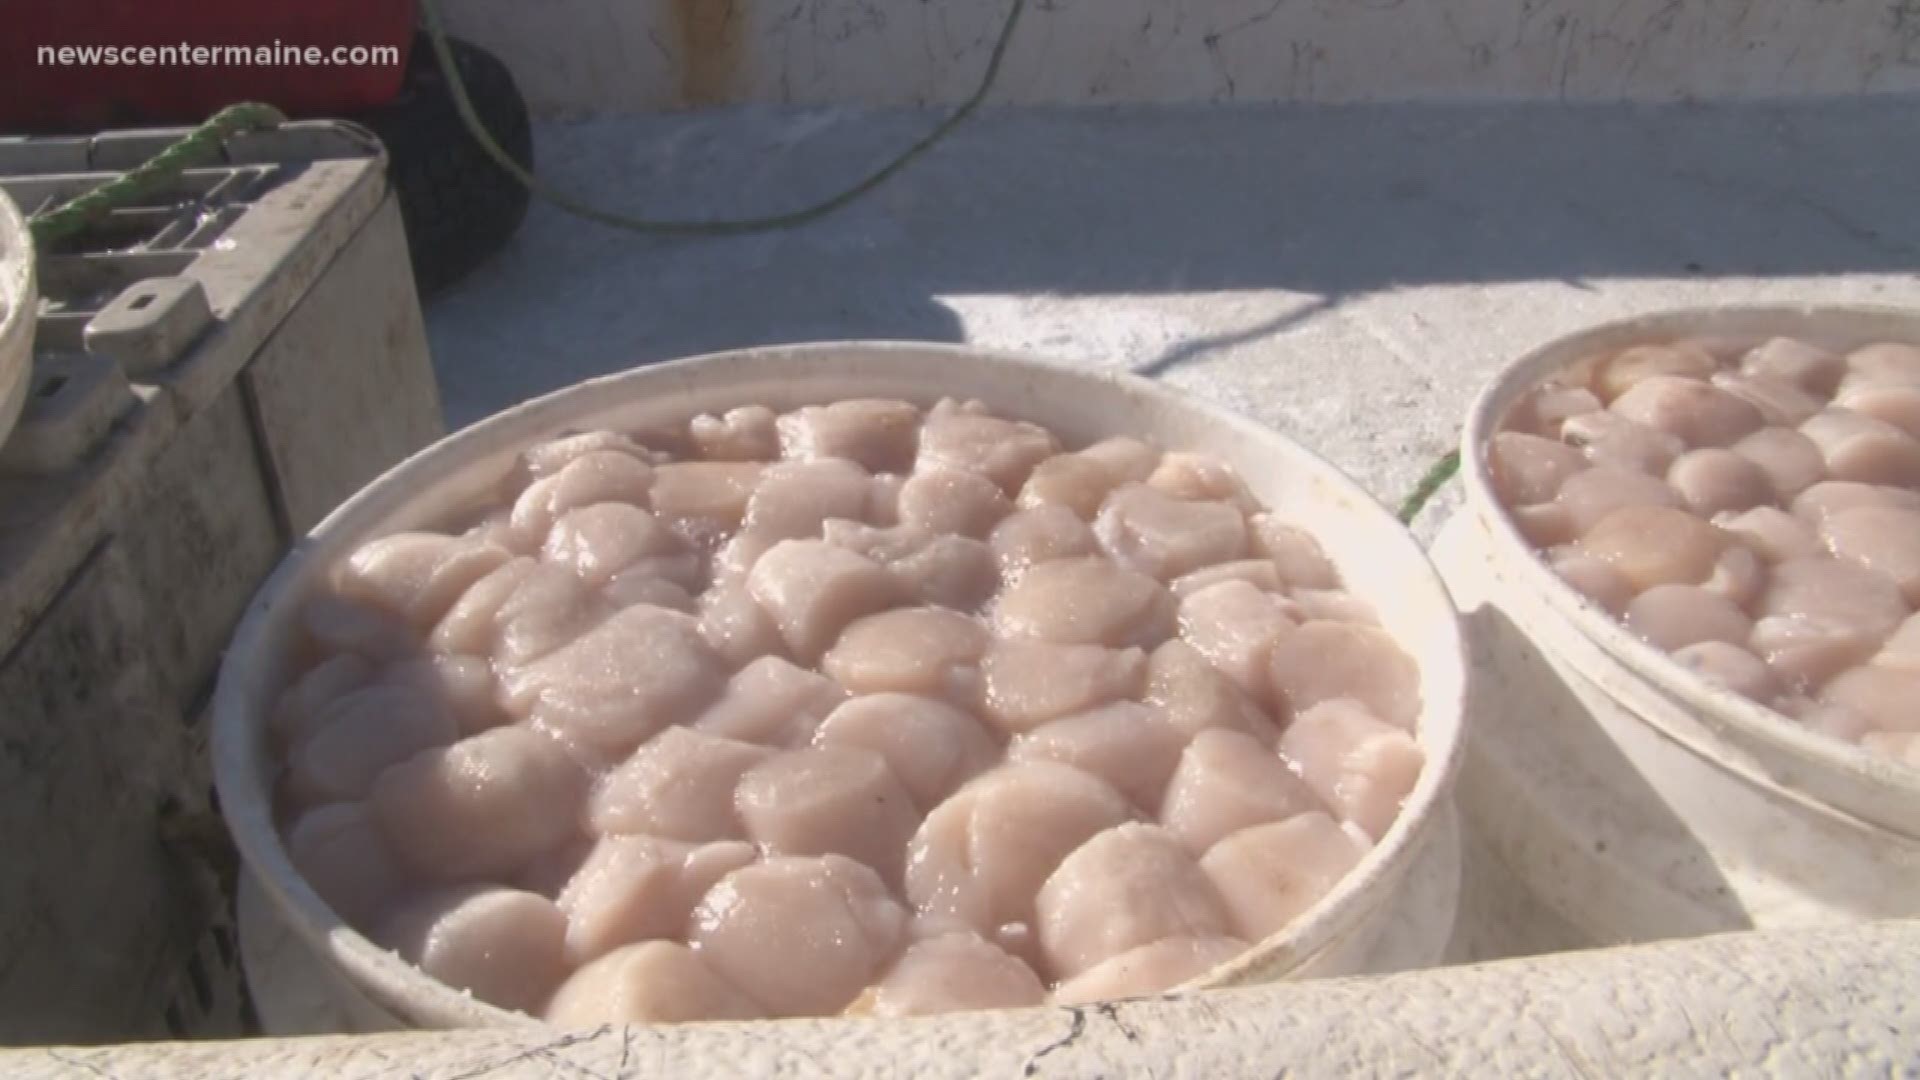 Four scallop fishing licenses are up for grabs right now in Maine by lottery